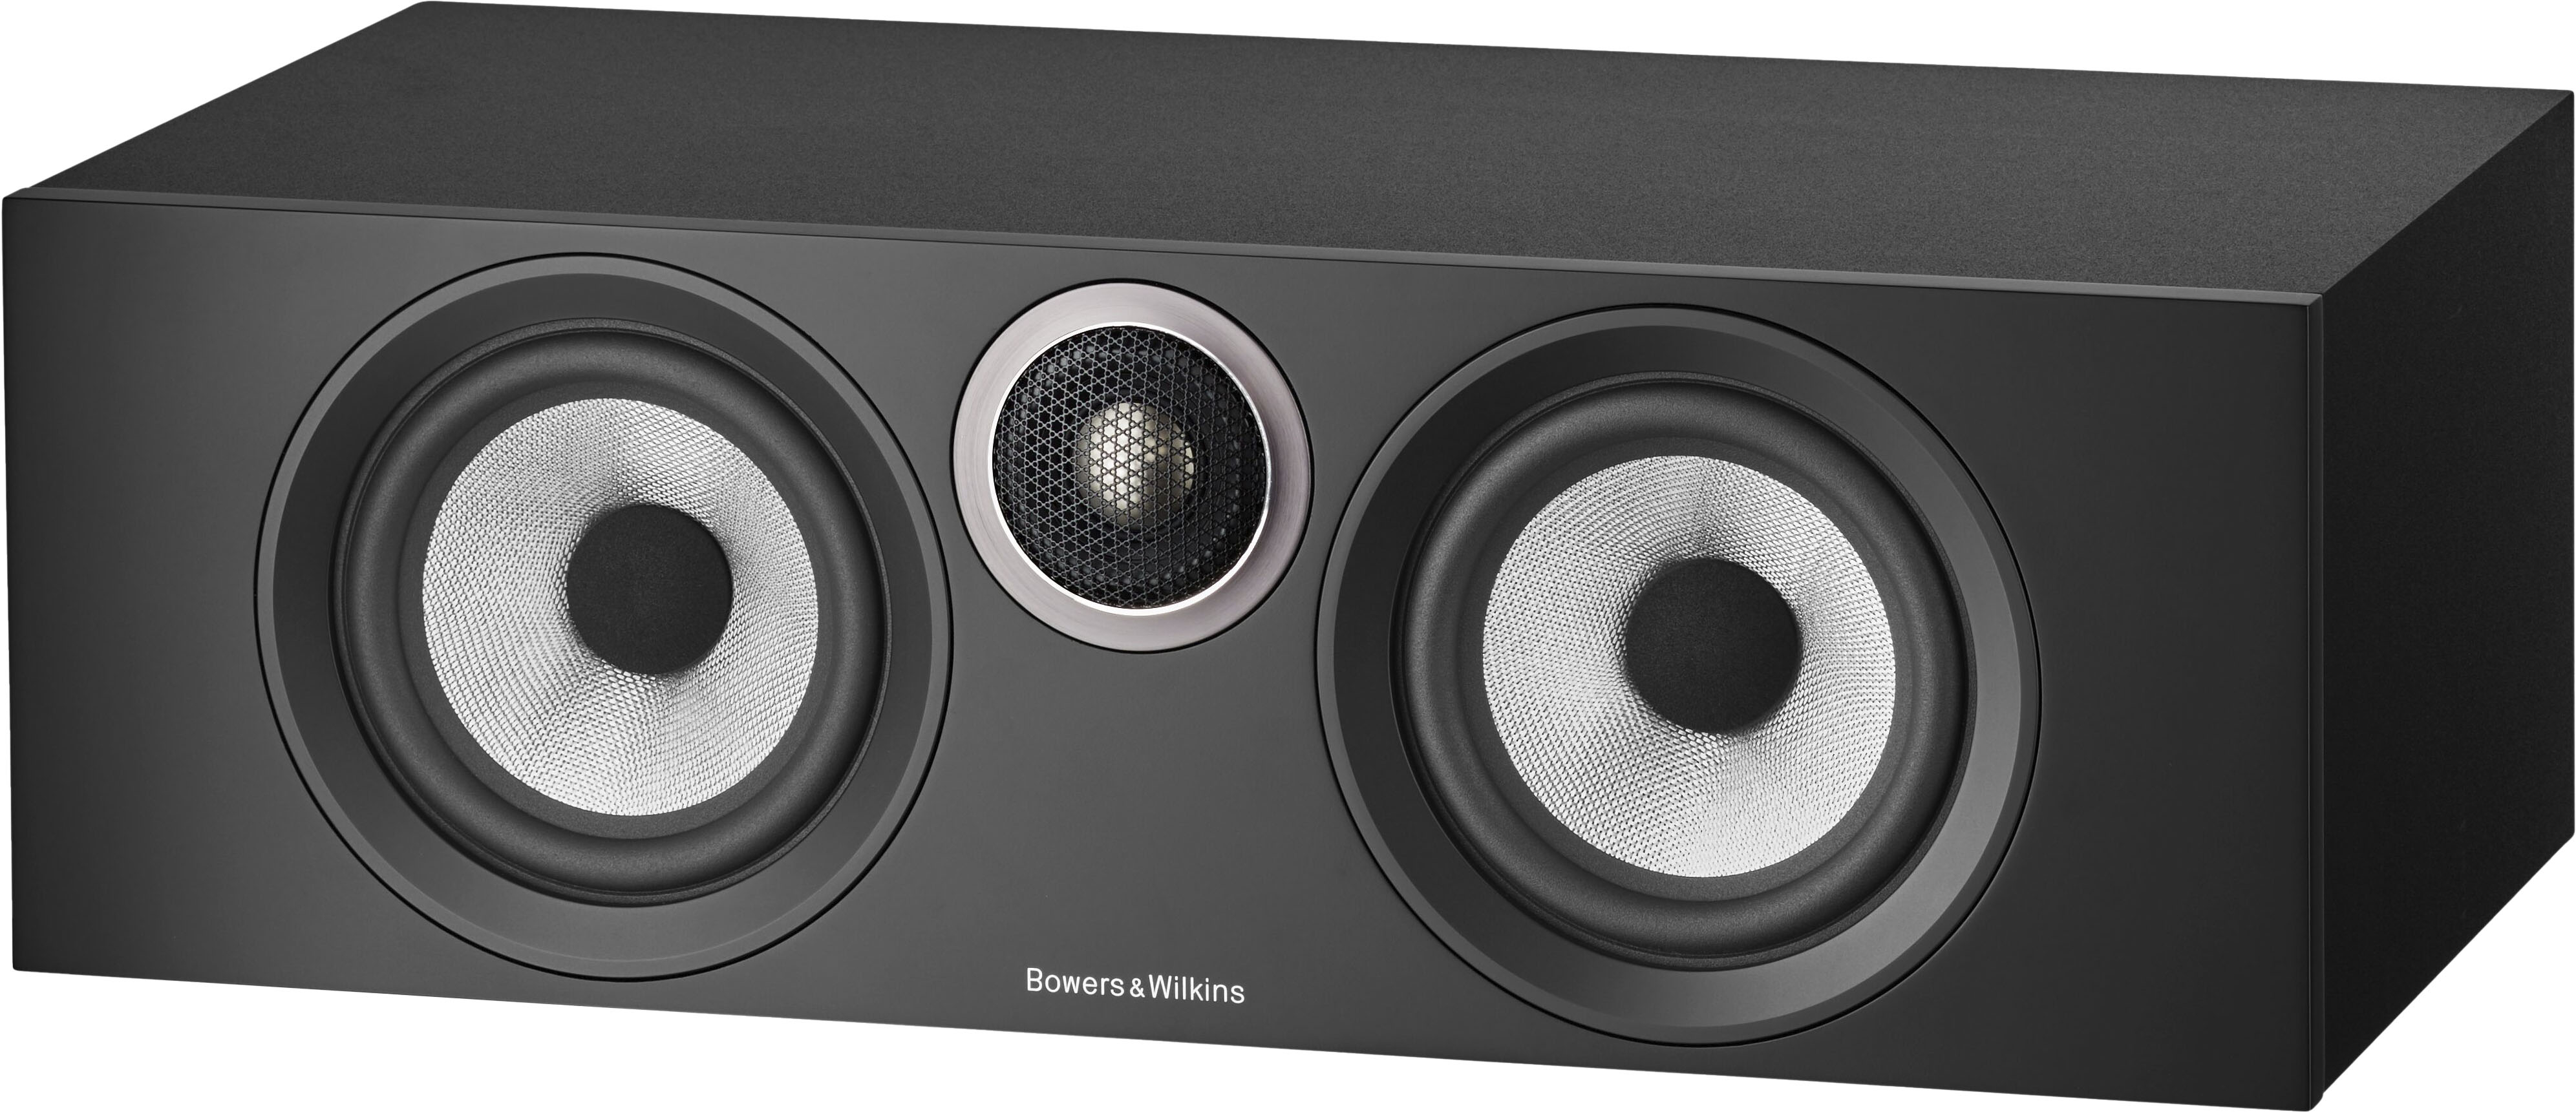 Bowers & Wilkins 600 S3 Series 2-way Center Channel w/ dual 5 